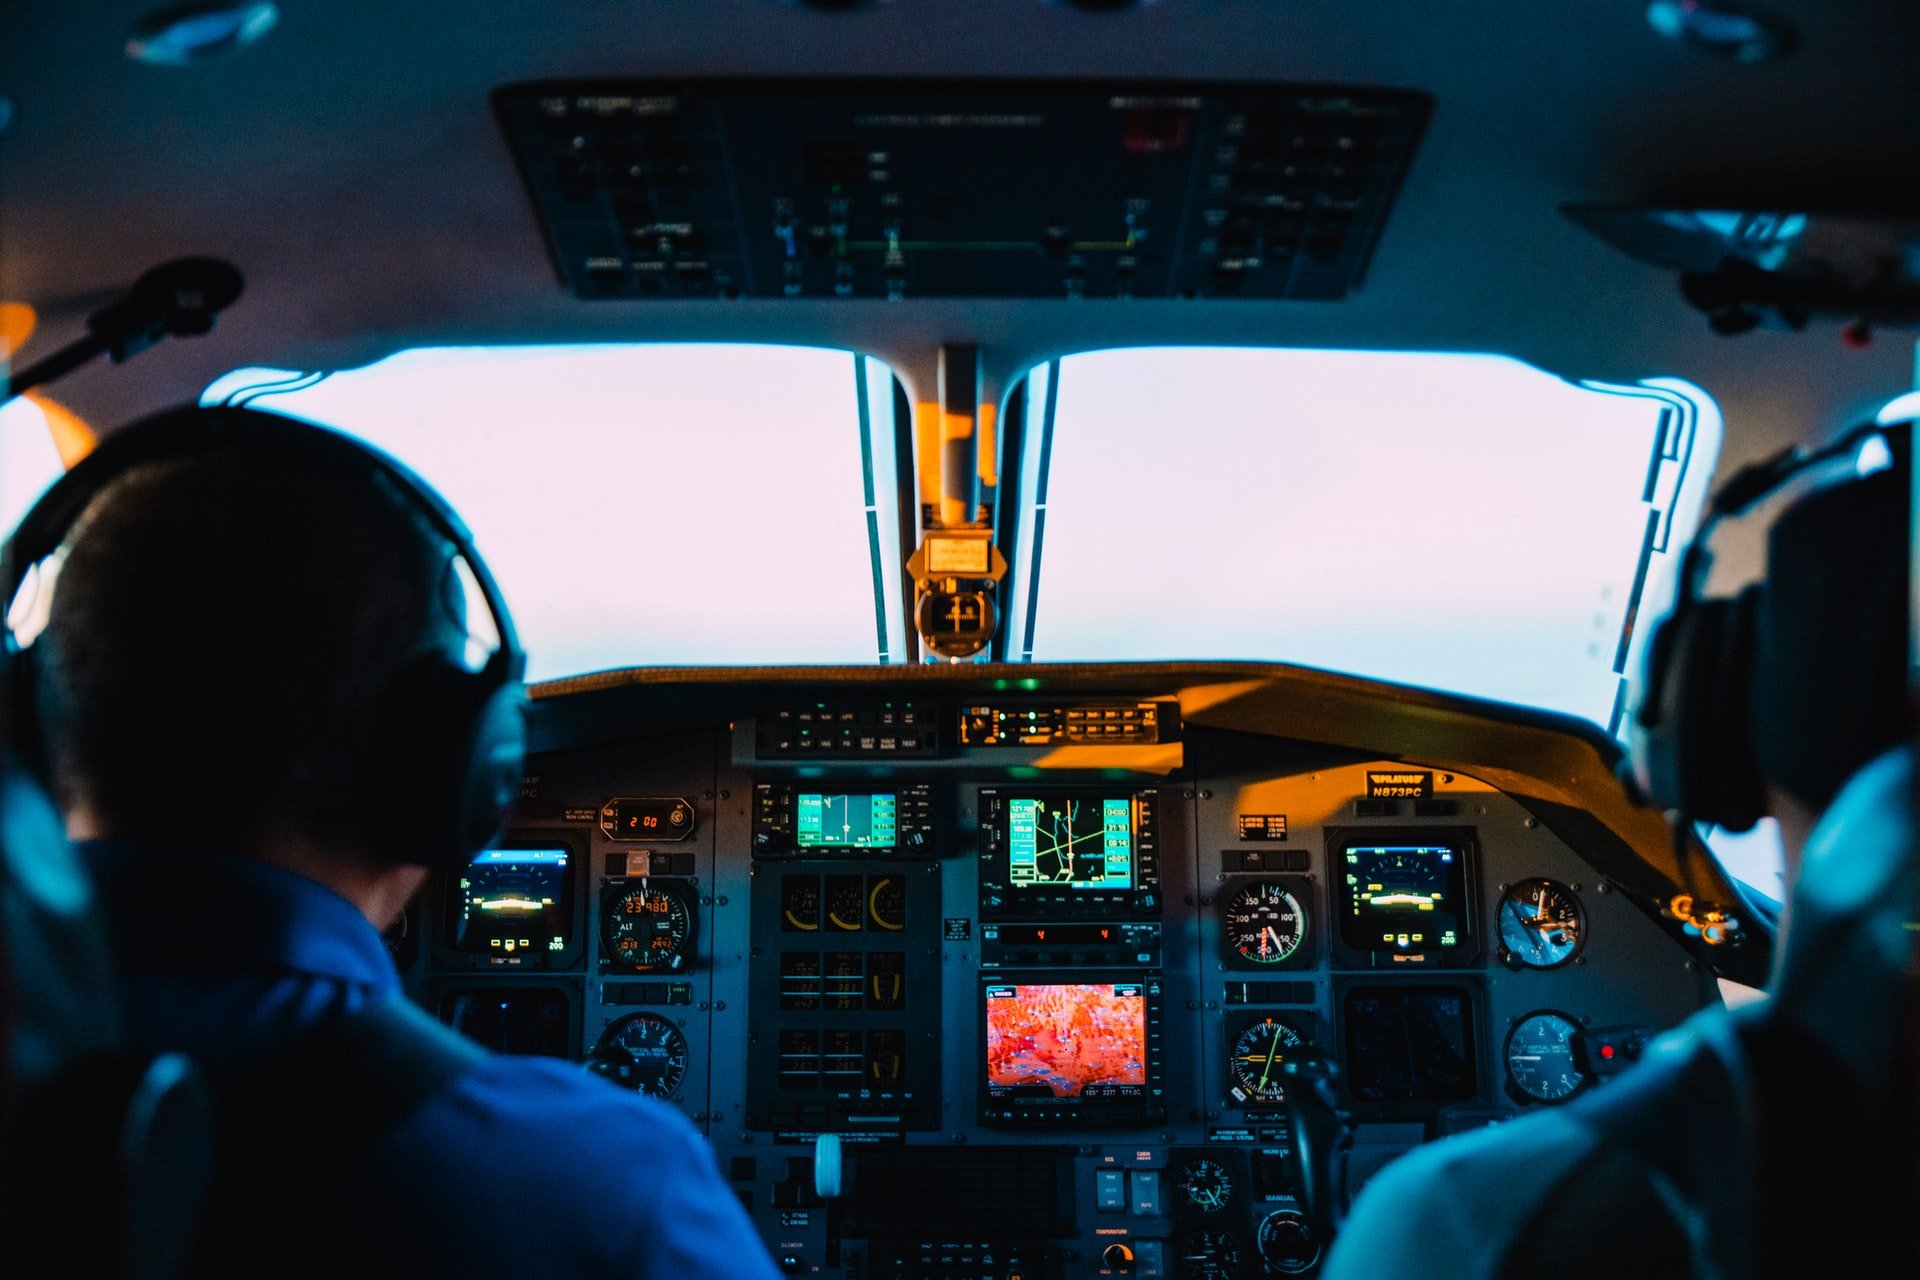 She sought assignment to the cockpit | Source: Unsplash